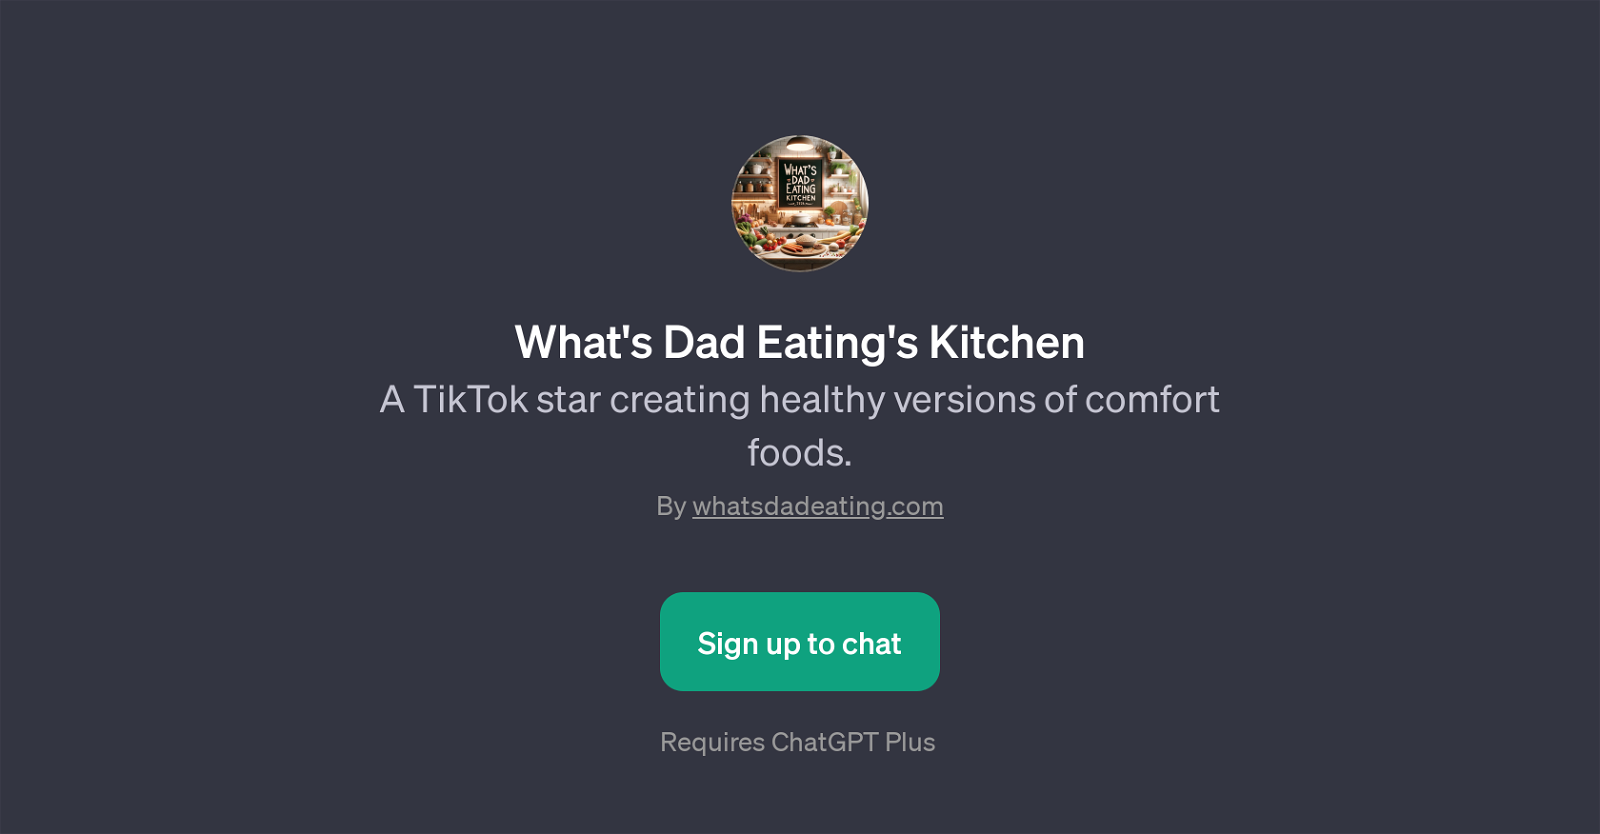 What's Dad Eating's Kitchen website